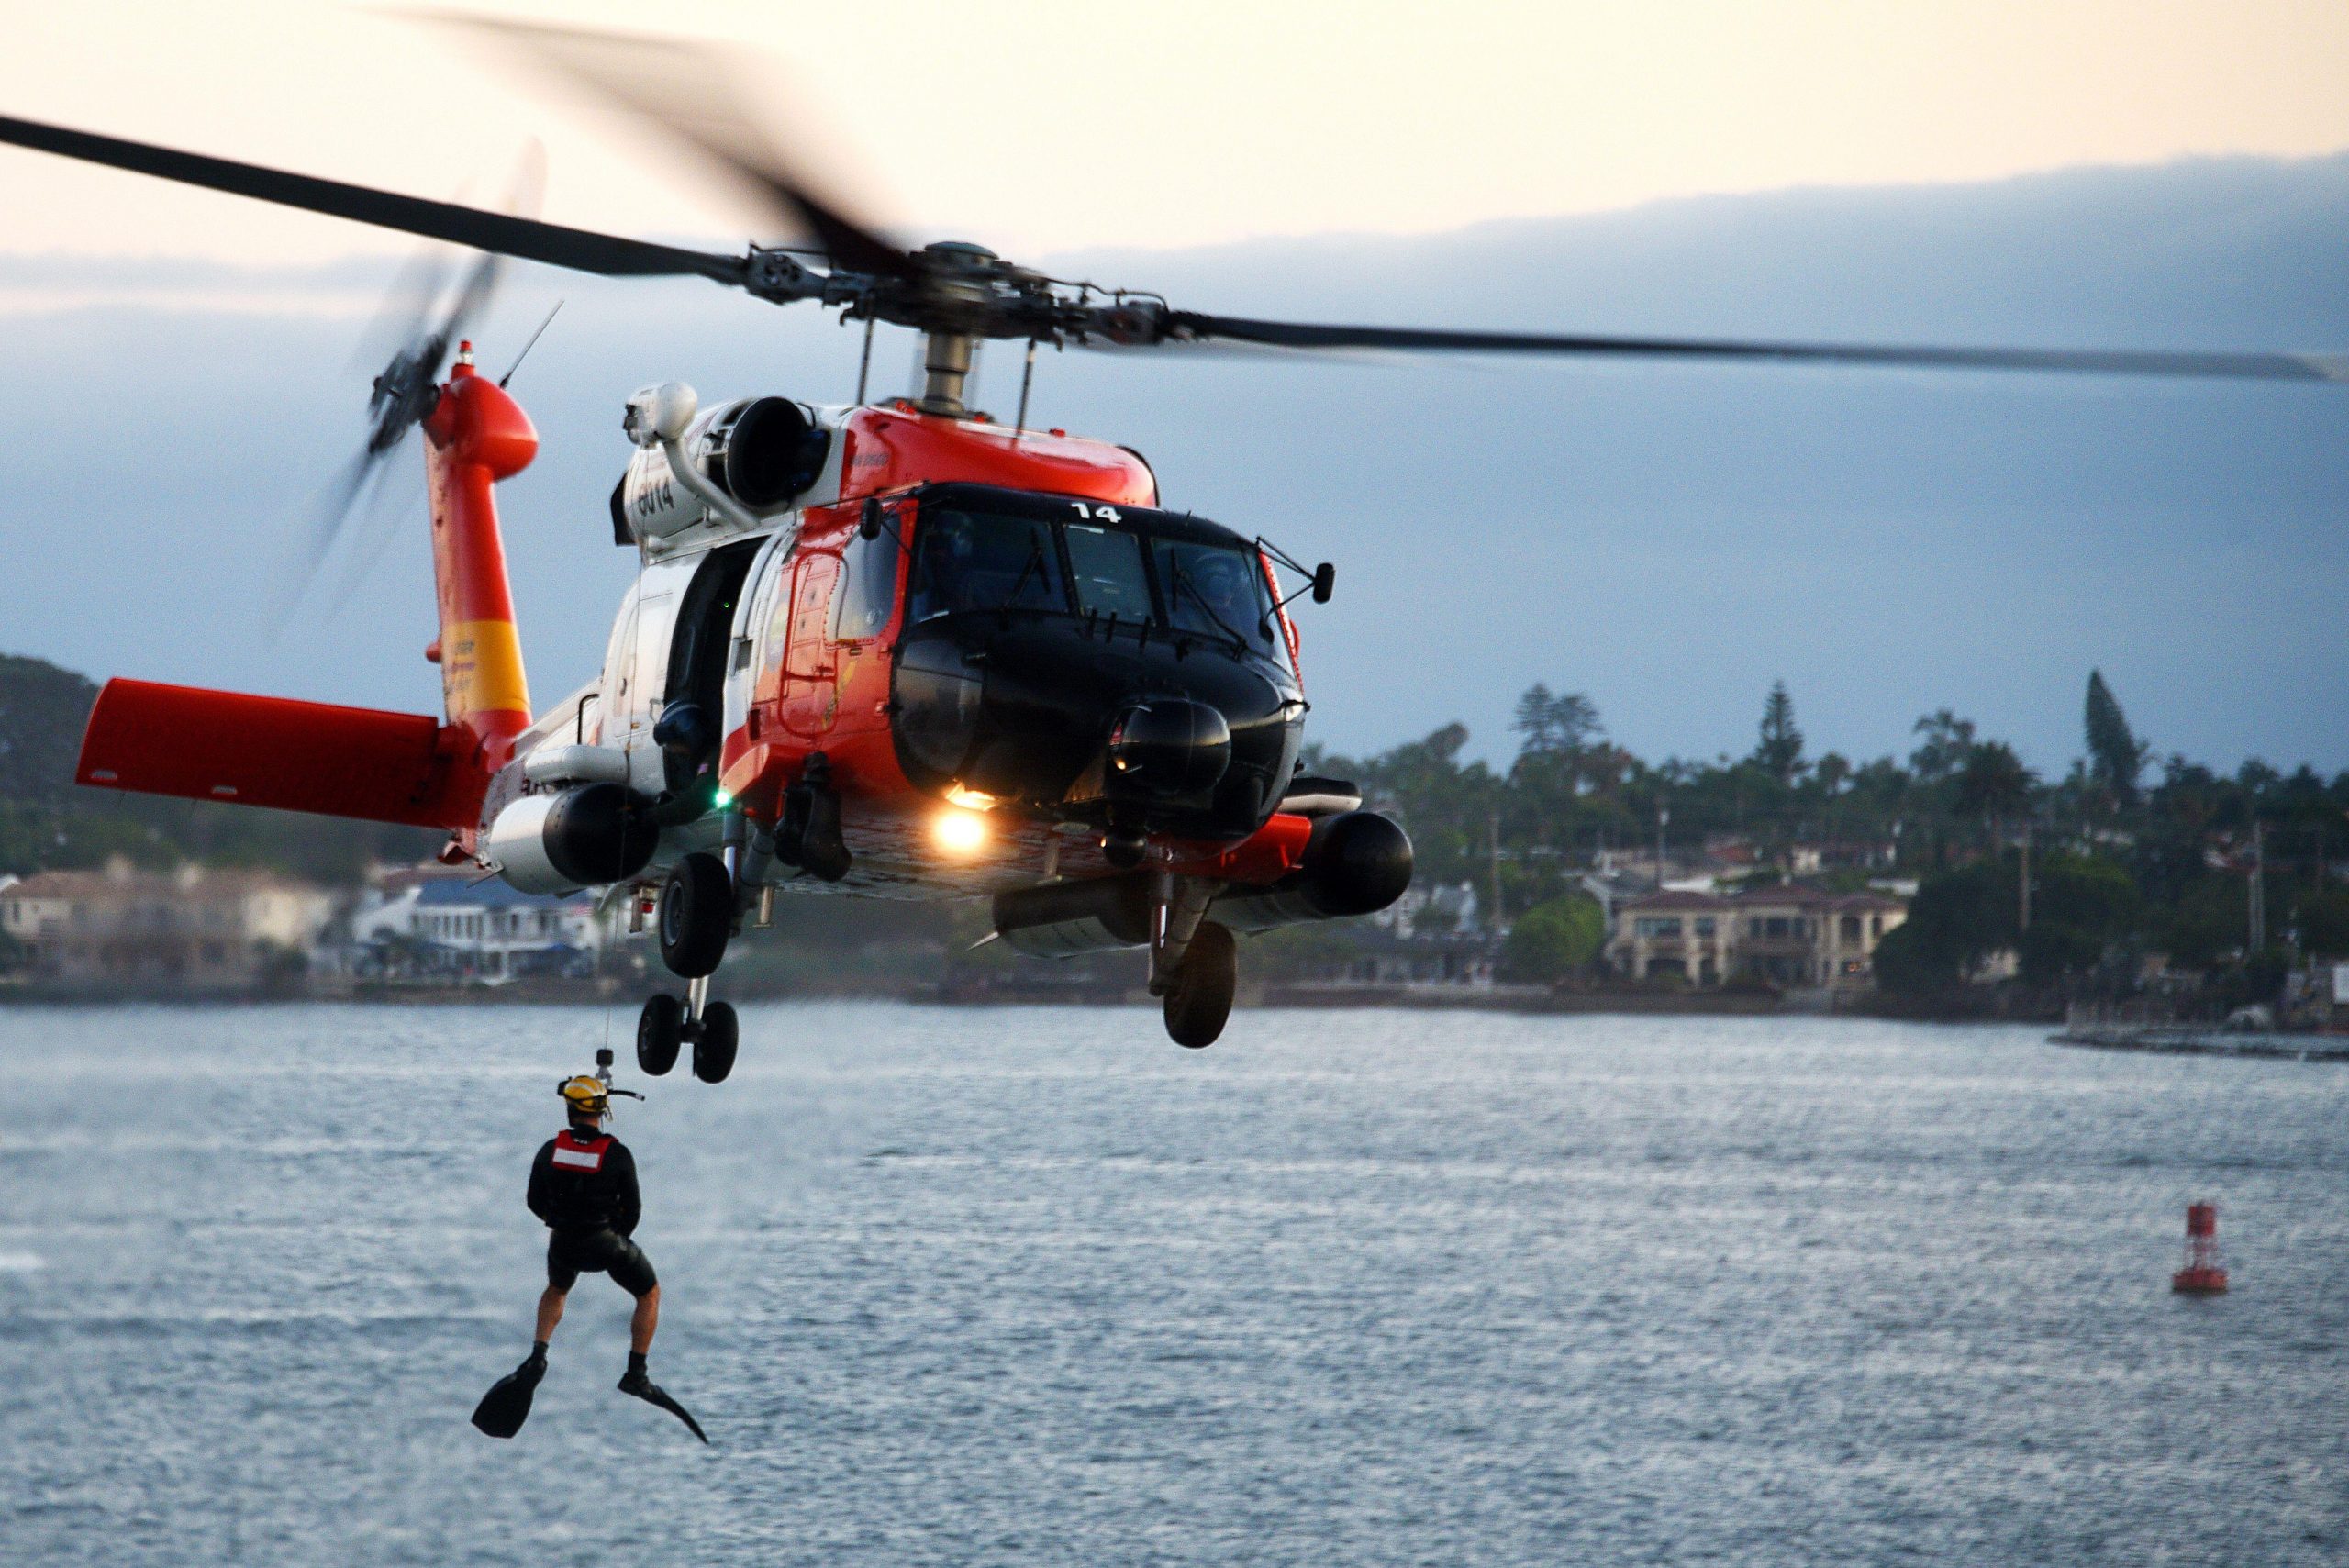 A U.S. Coast Guard Sector San Diego MH-60T Jayhawk helicopter crew conducts a search and rescue demonstration